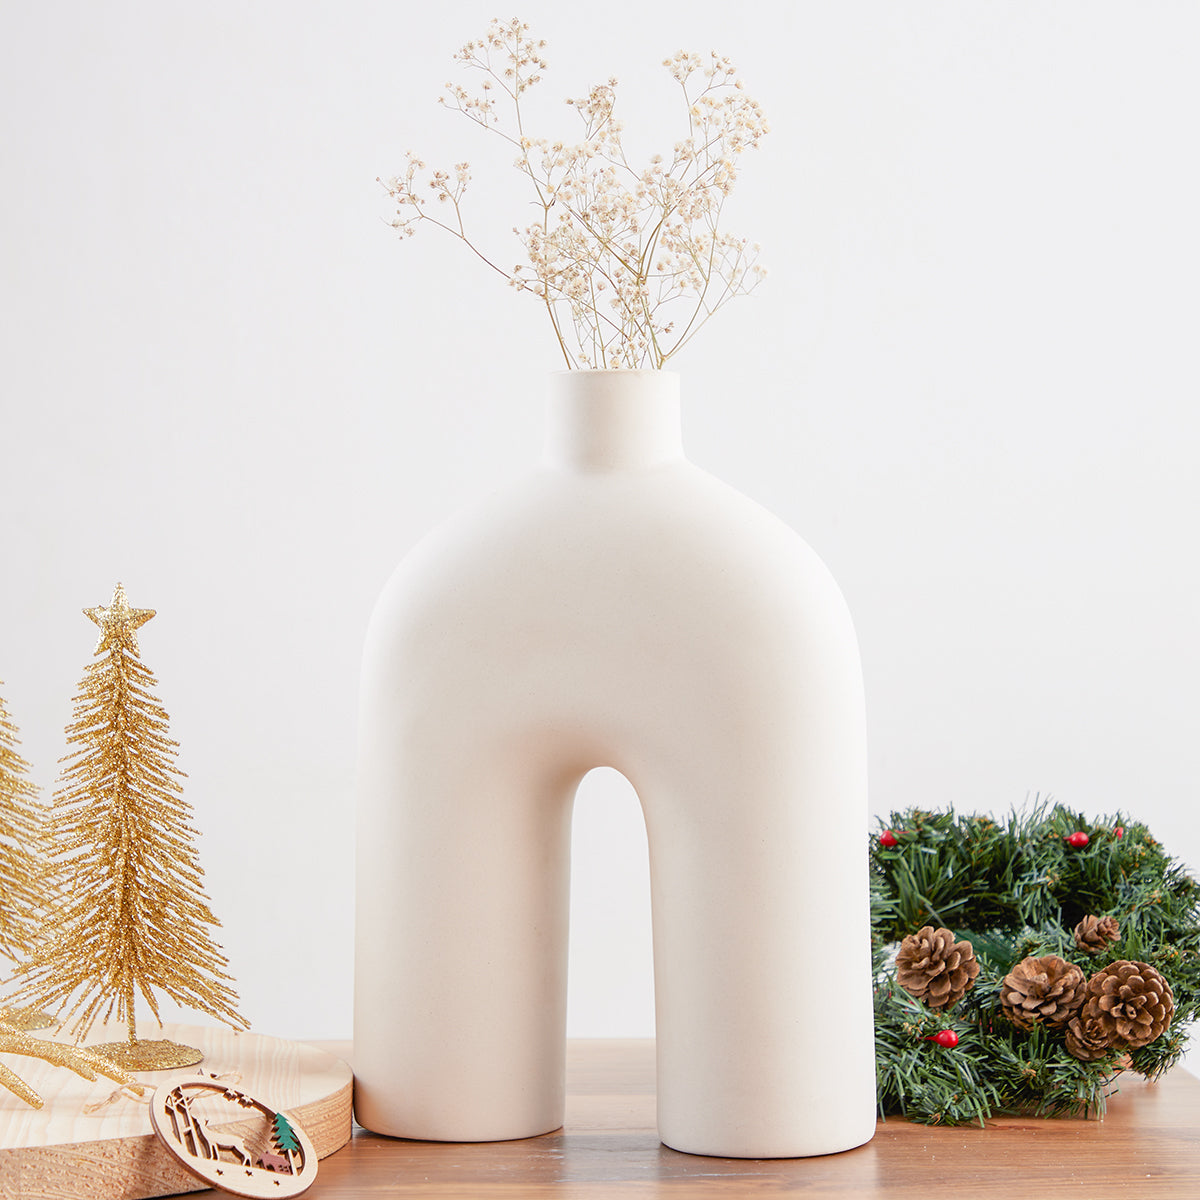 The Bridge Nordic White Ceramic Vase from Studio Palasa is a masterful addition to any room. 